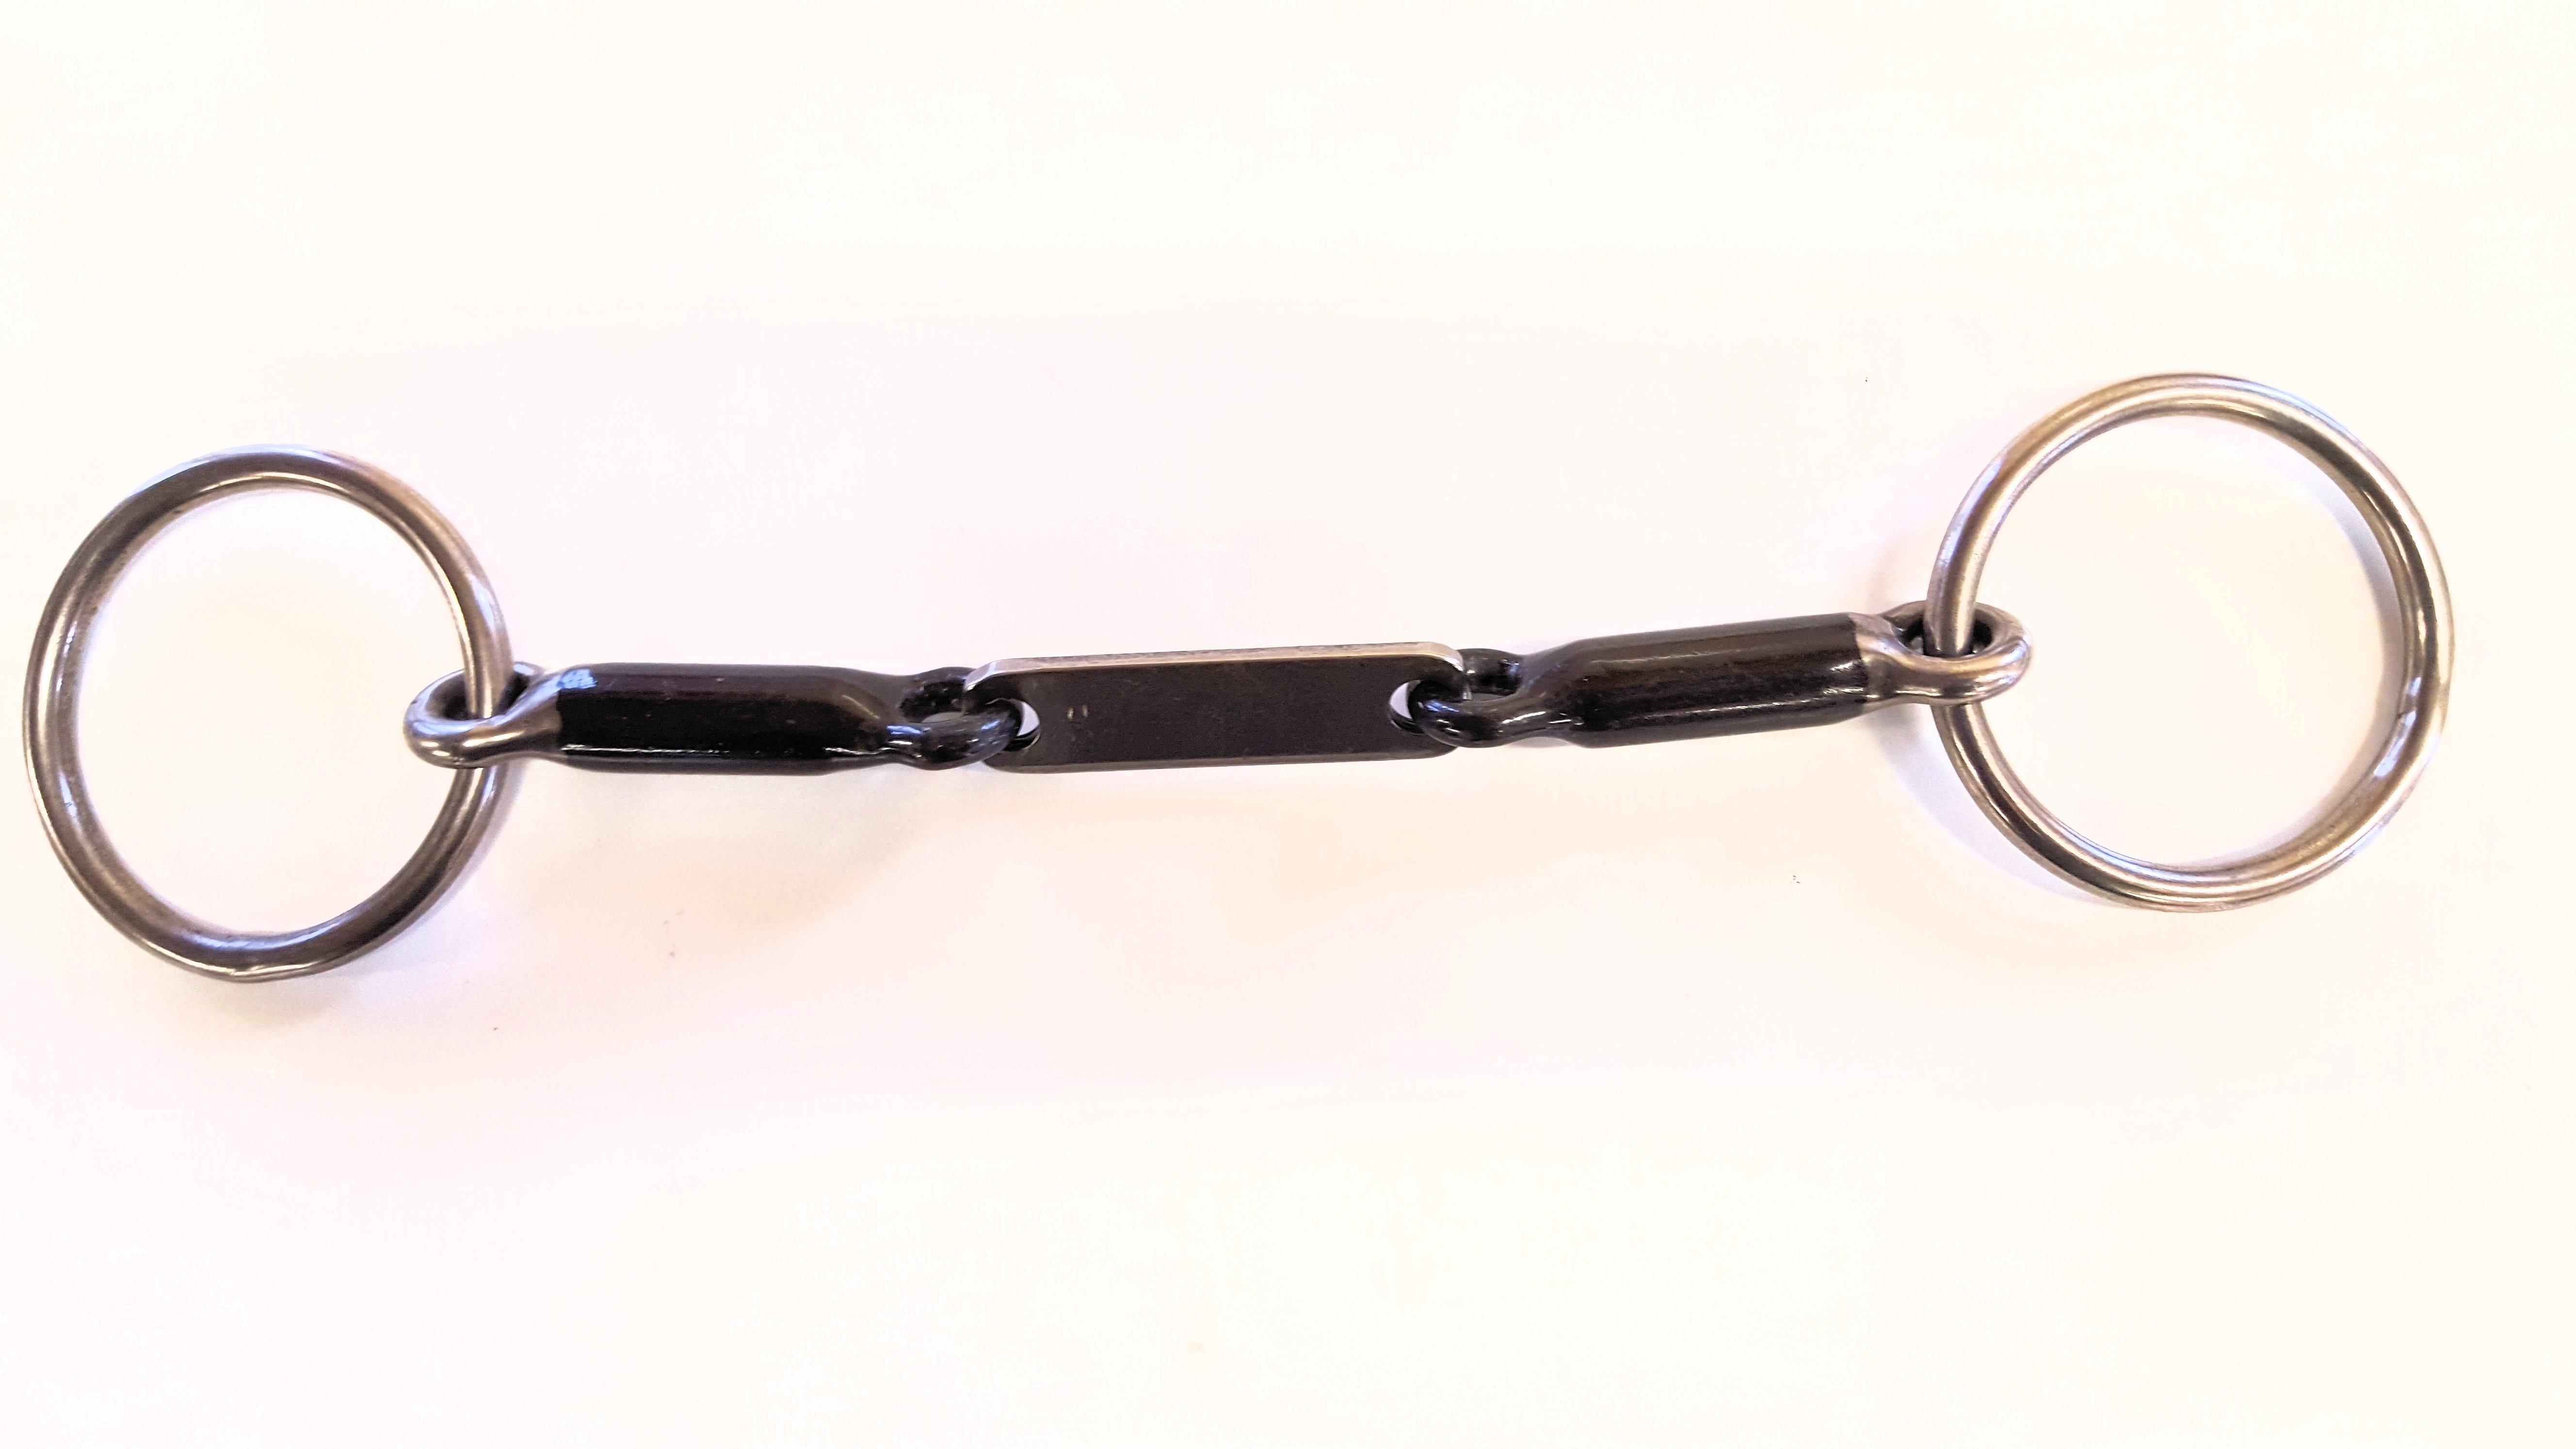 3/8" smooth snaffle with 2" Plate in the middle 2" rings